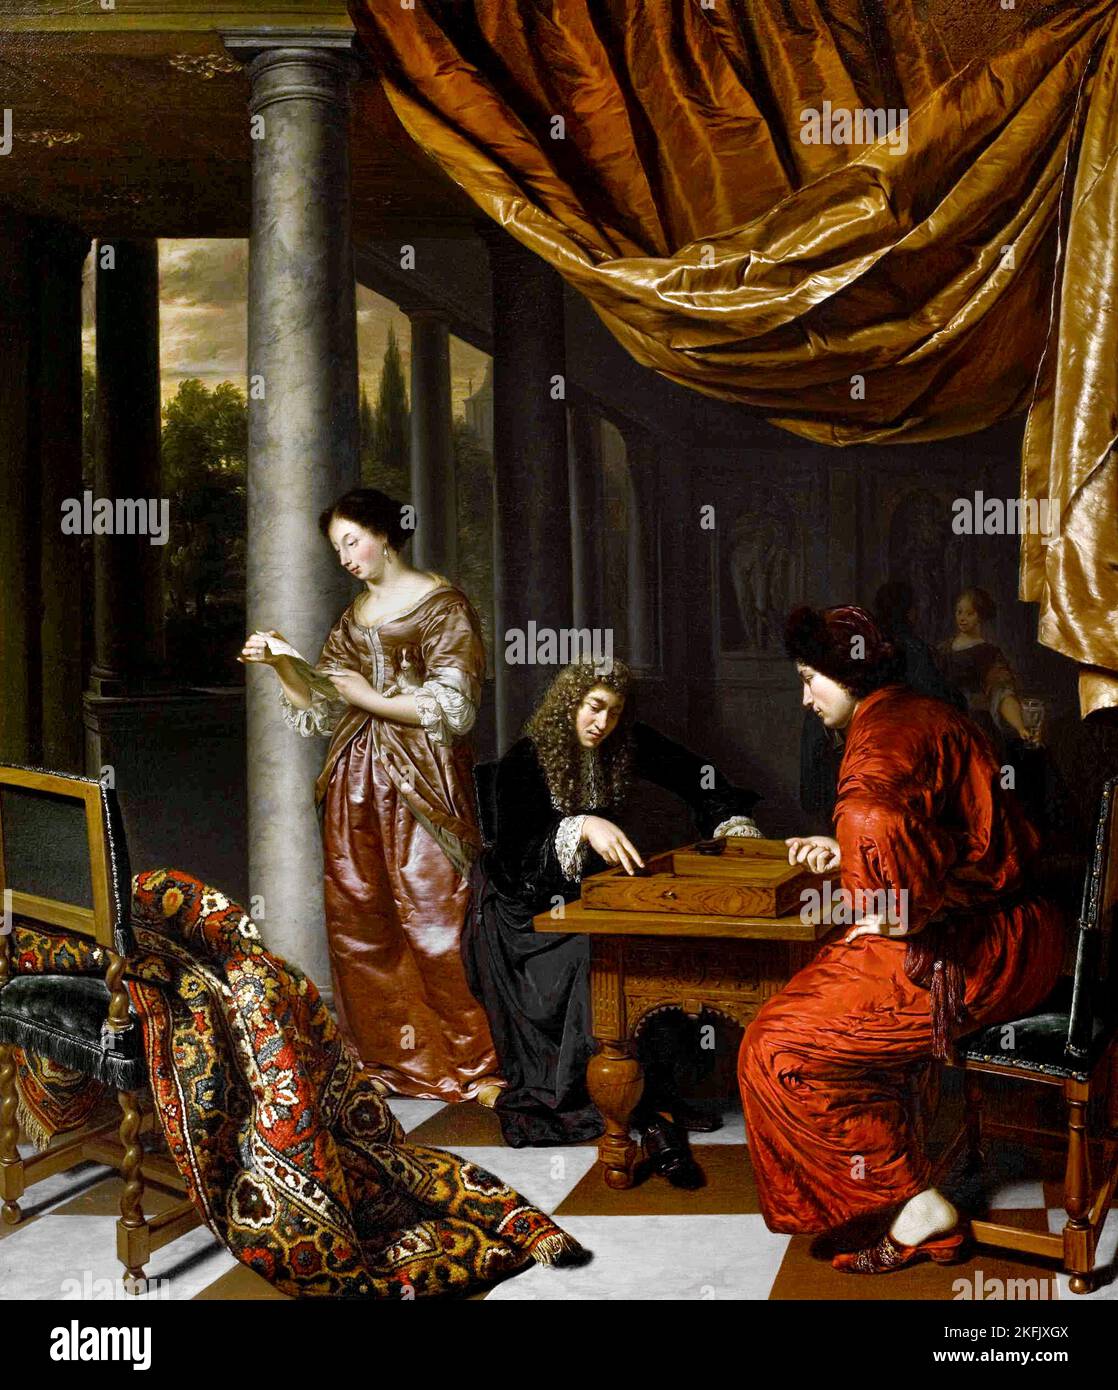 Frans van Mieris the Elder; Interior with Figures Playing Tric-Trac; 1680; Oil on canvas; Museum of Fine Arts, Houston, USA. Stock Photo